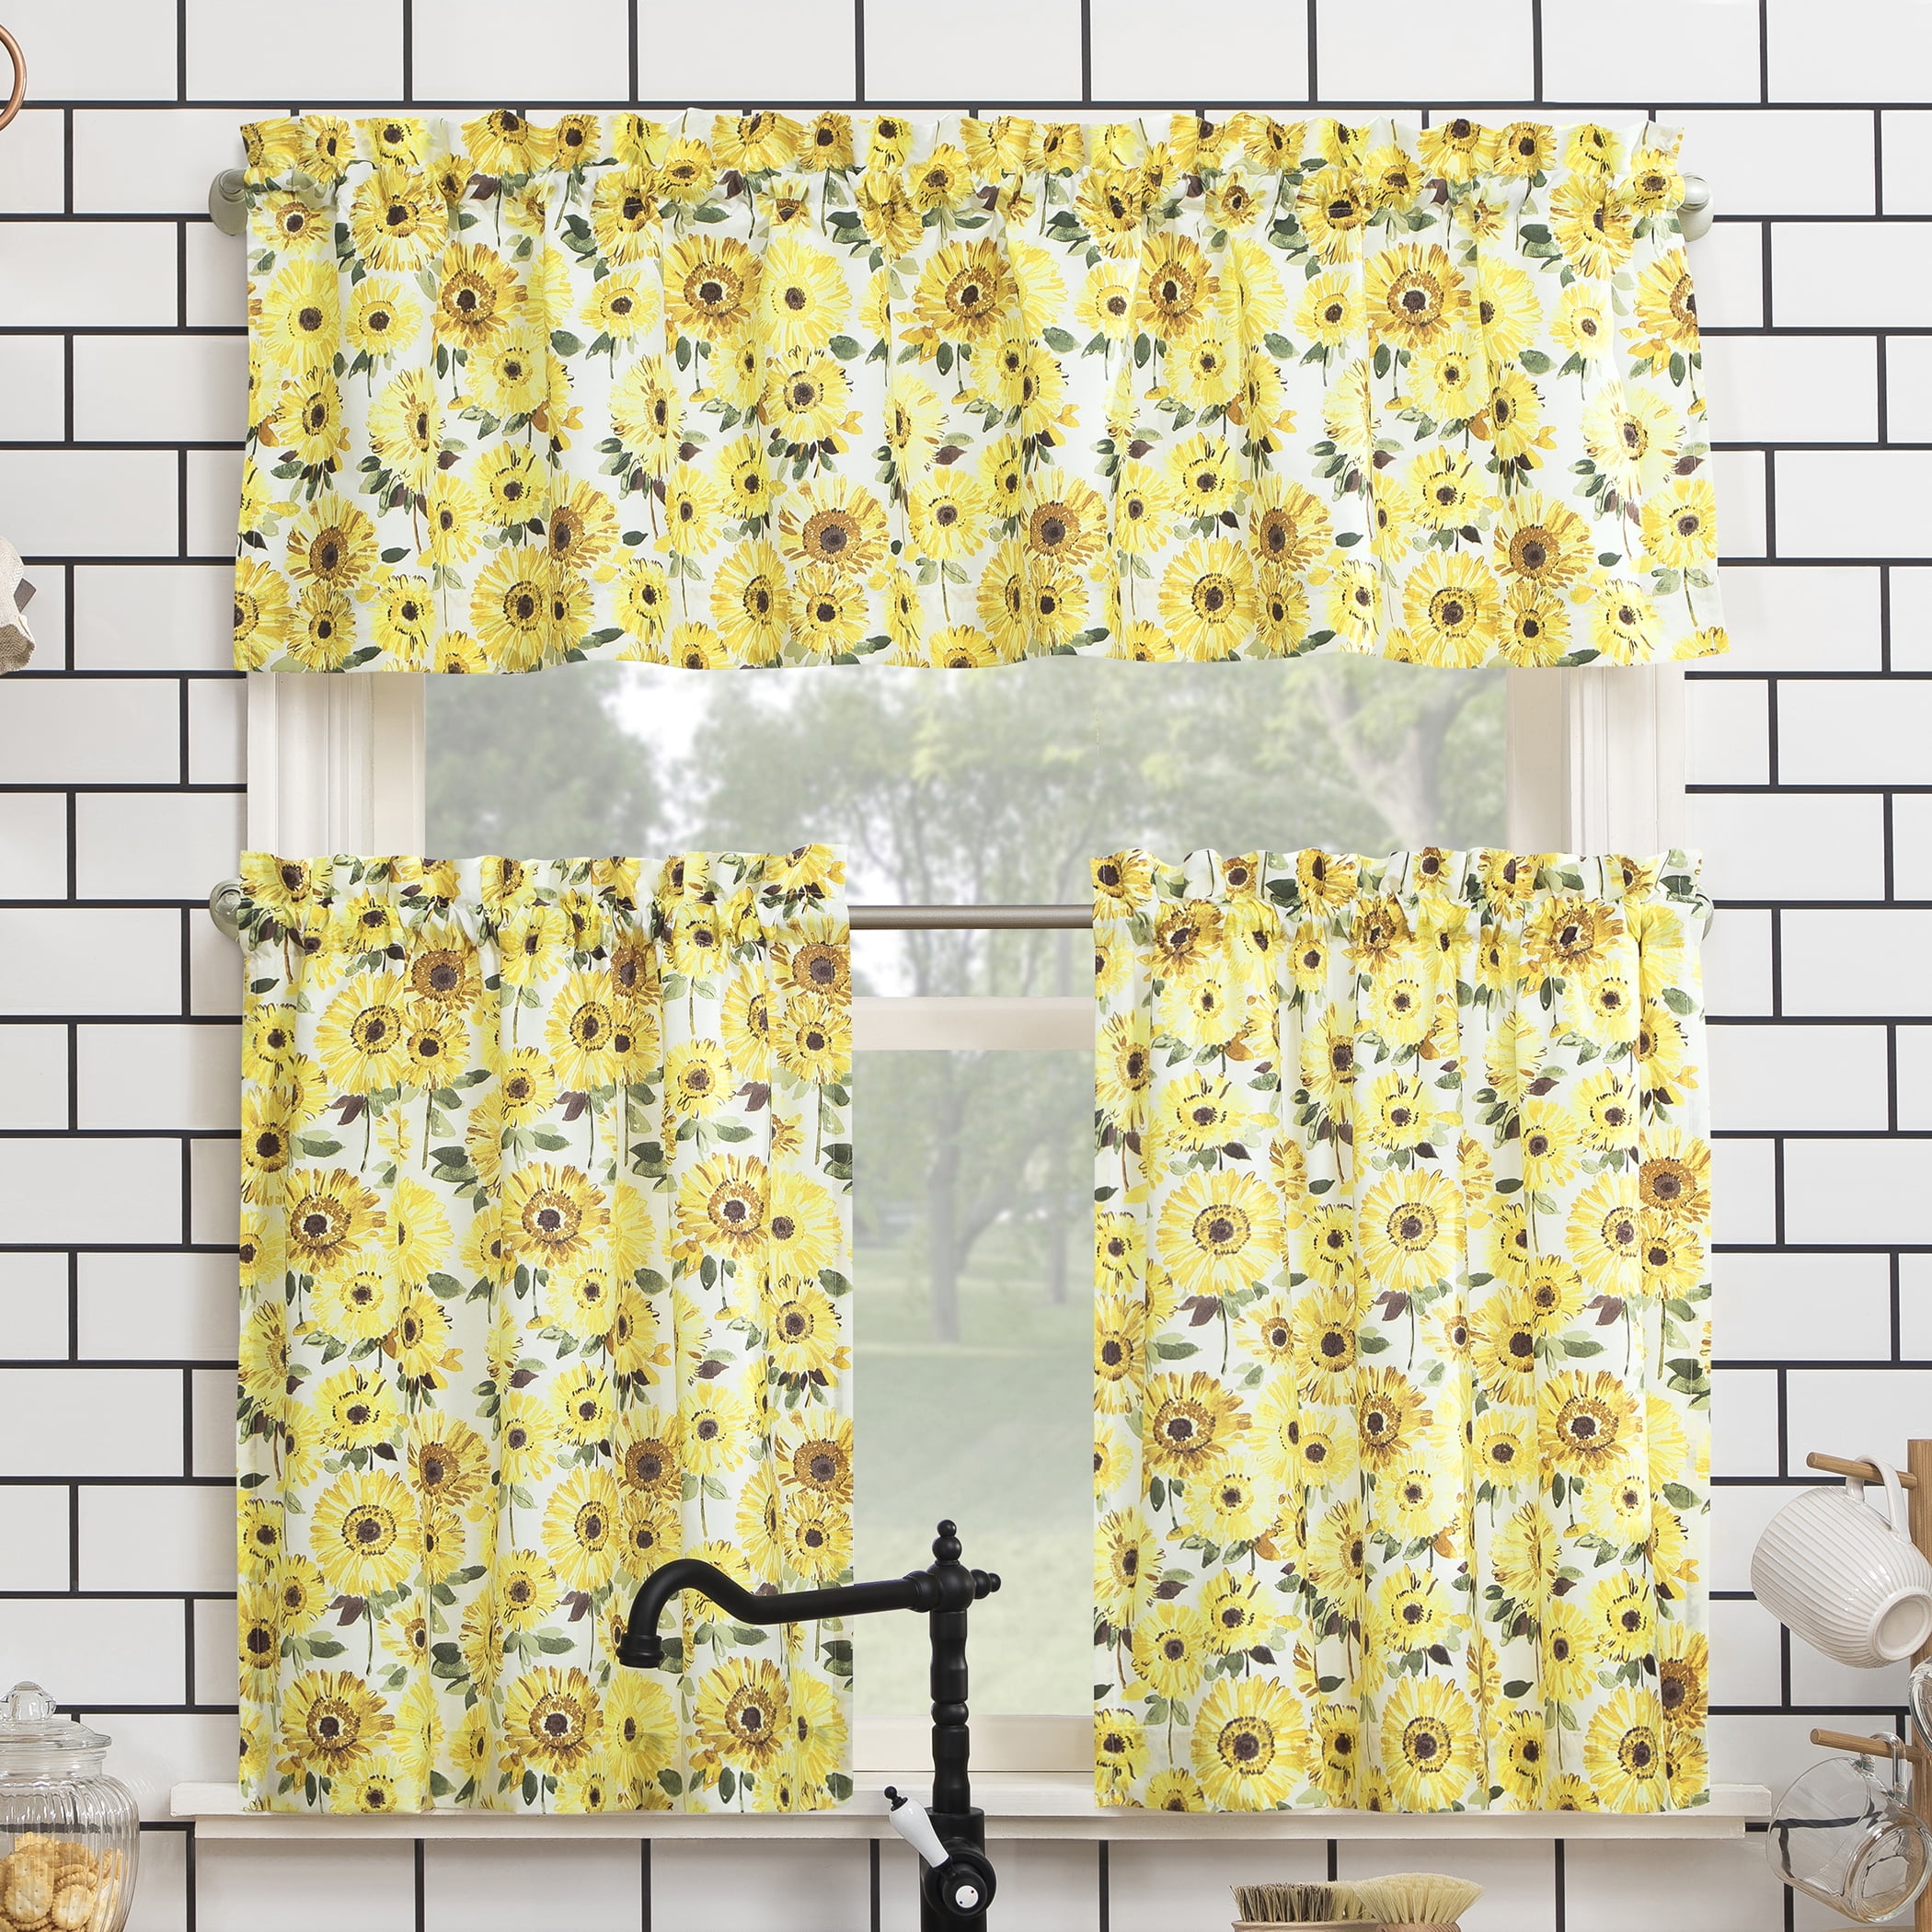 Ambesonne Cartoon Kitchen Curtains, Bunny, 55 inchx45 inch, Yellow White Red, Size: 55 x 45